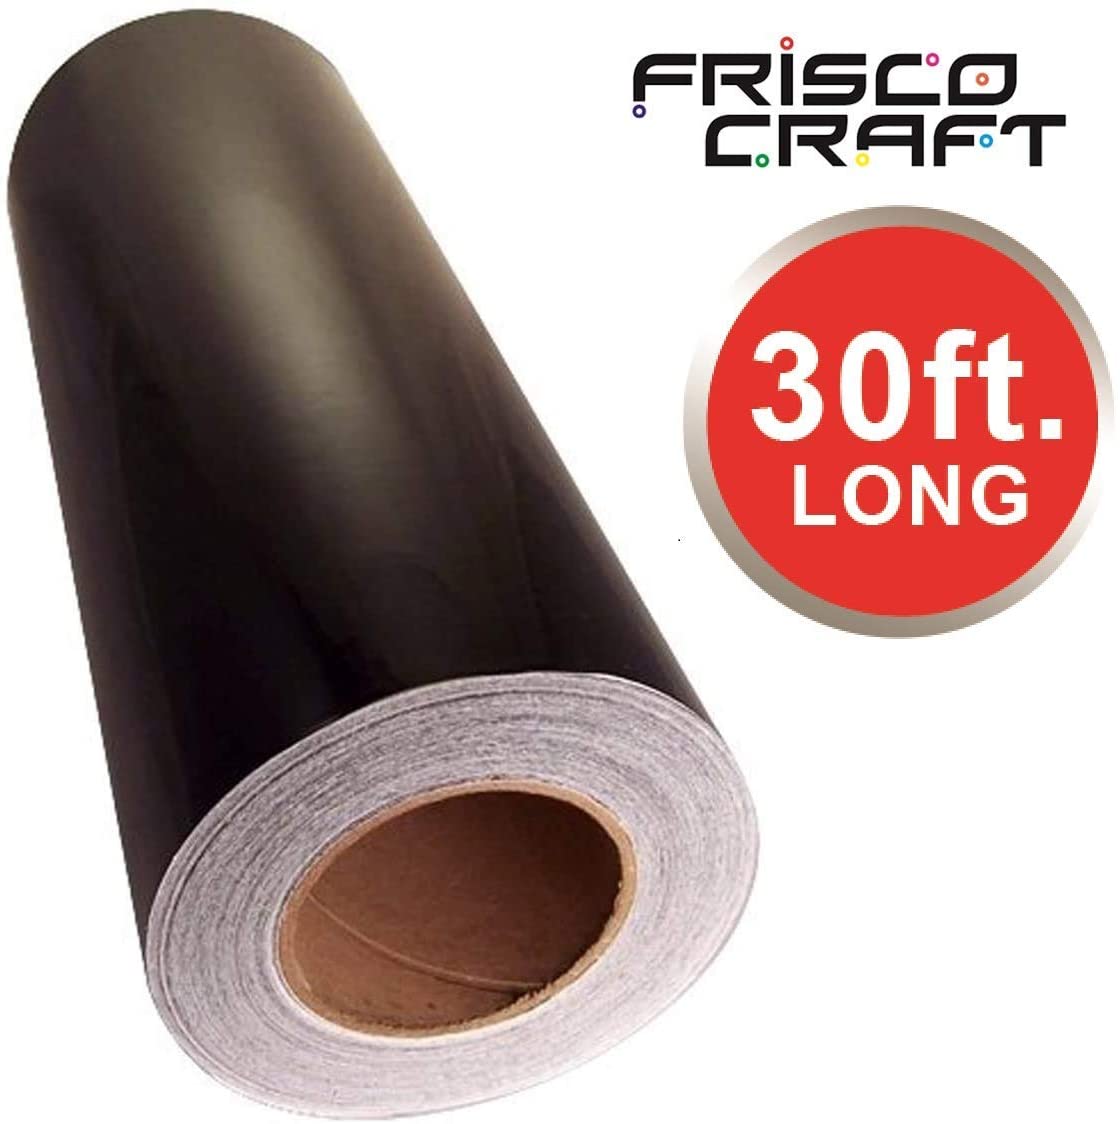 Frisco Craft C-370 Clear Lay Flat Transfer Tape for Vinyl 12 x 50